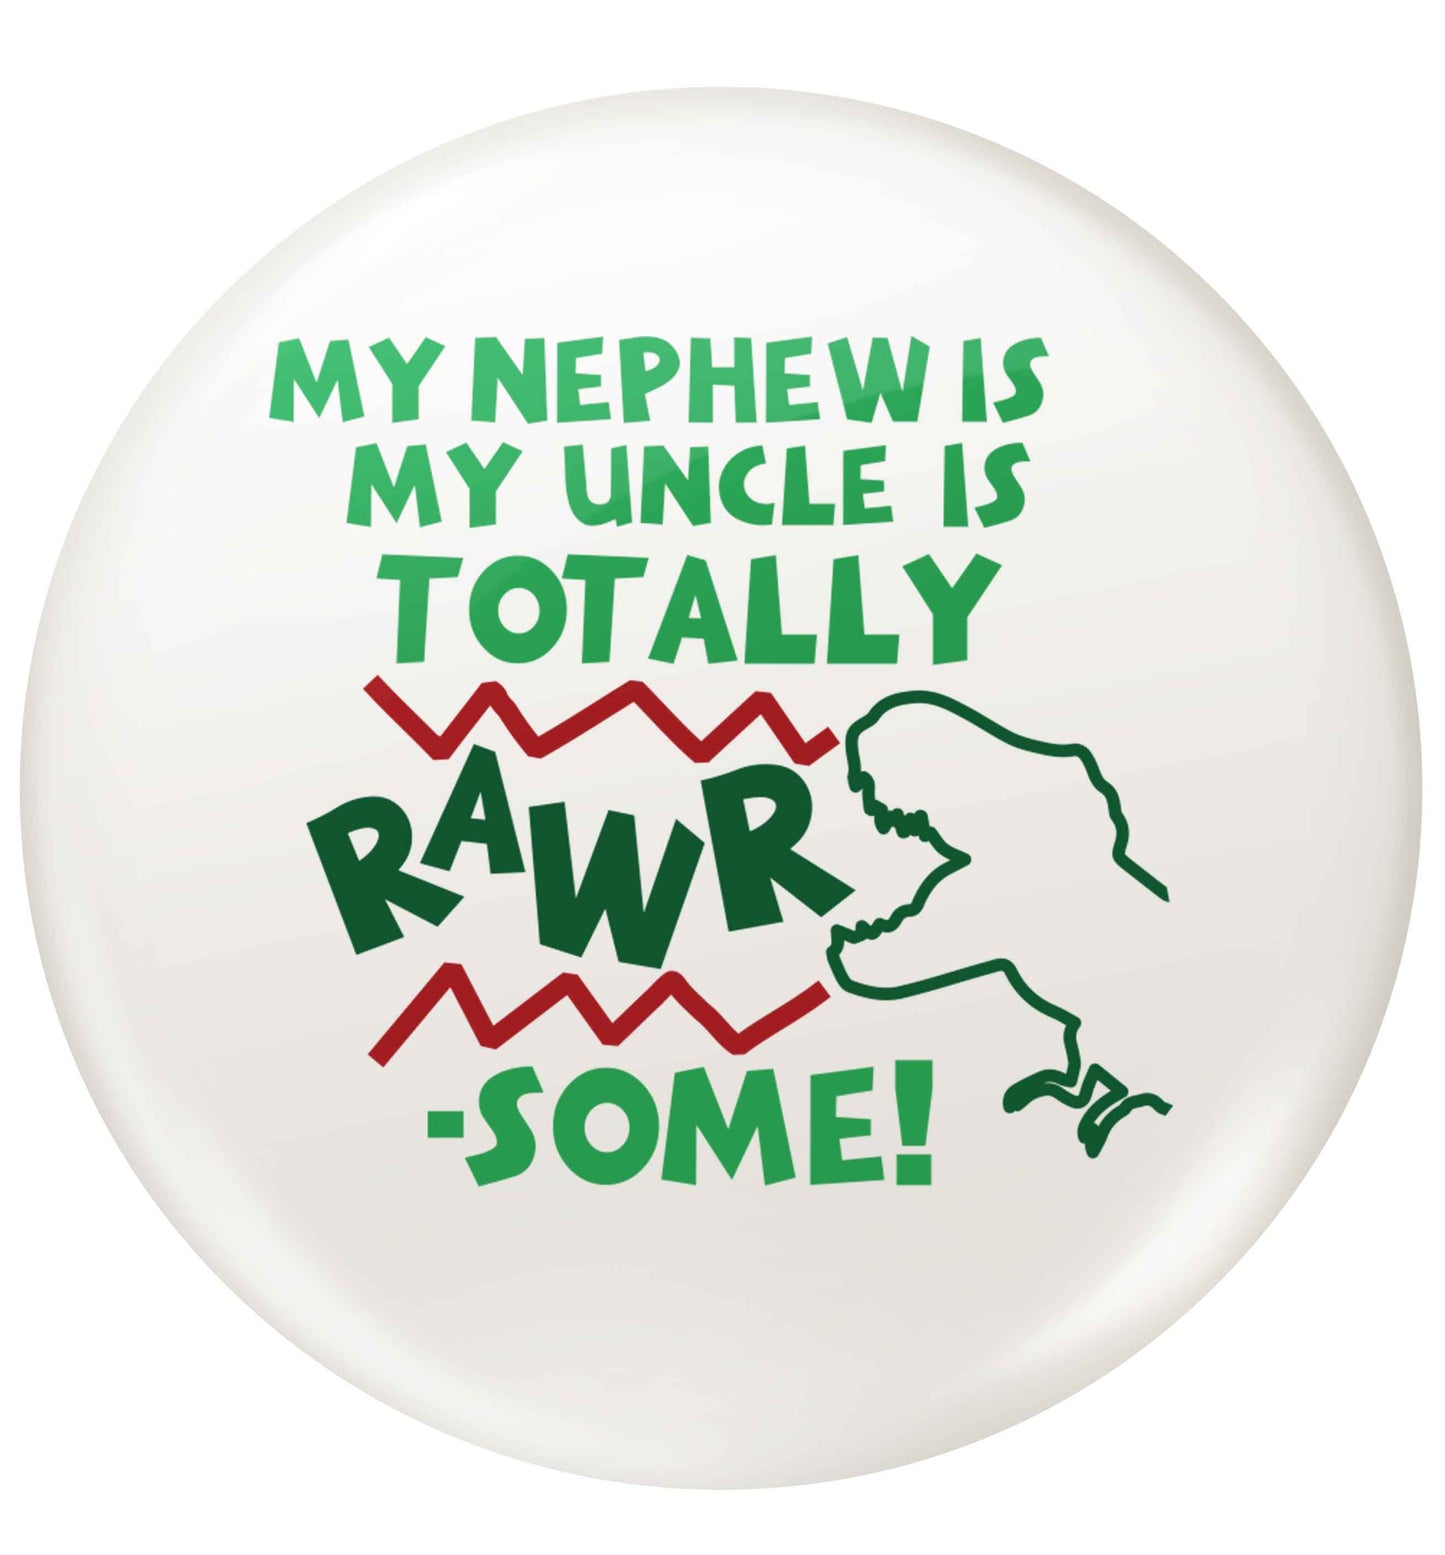 My nephew is totally rawrsome small 25mm Pin badge